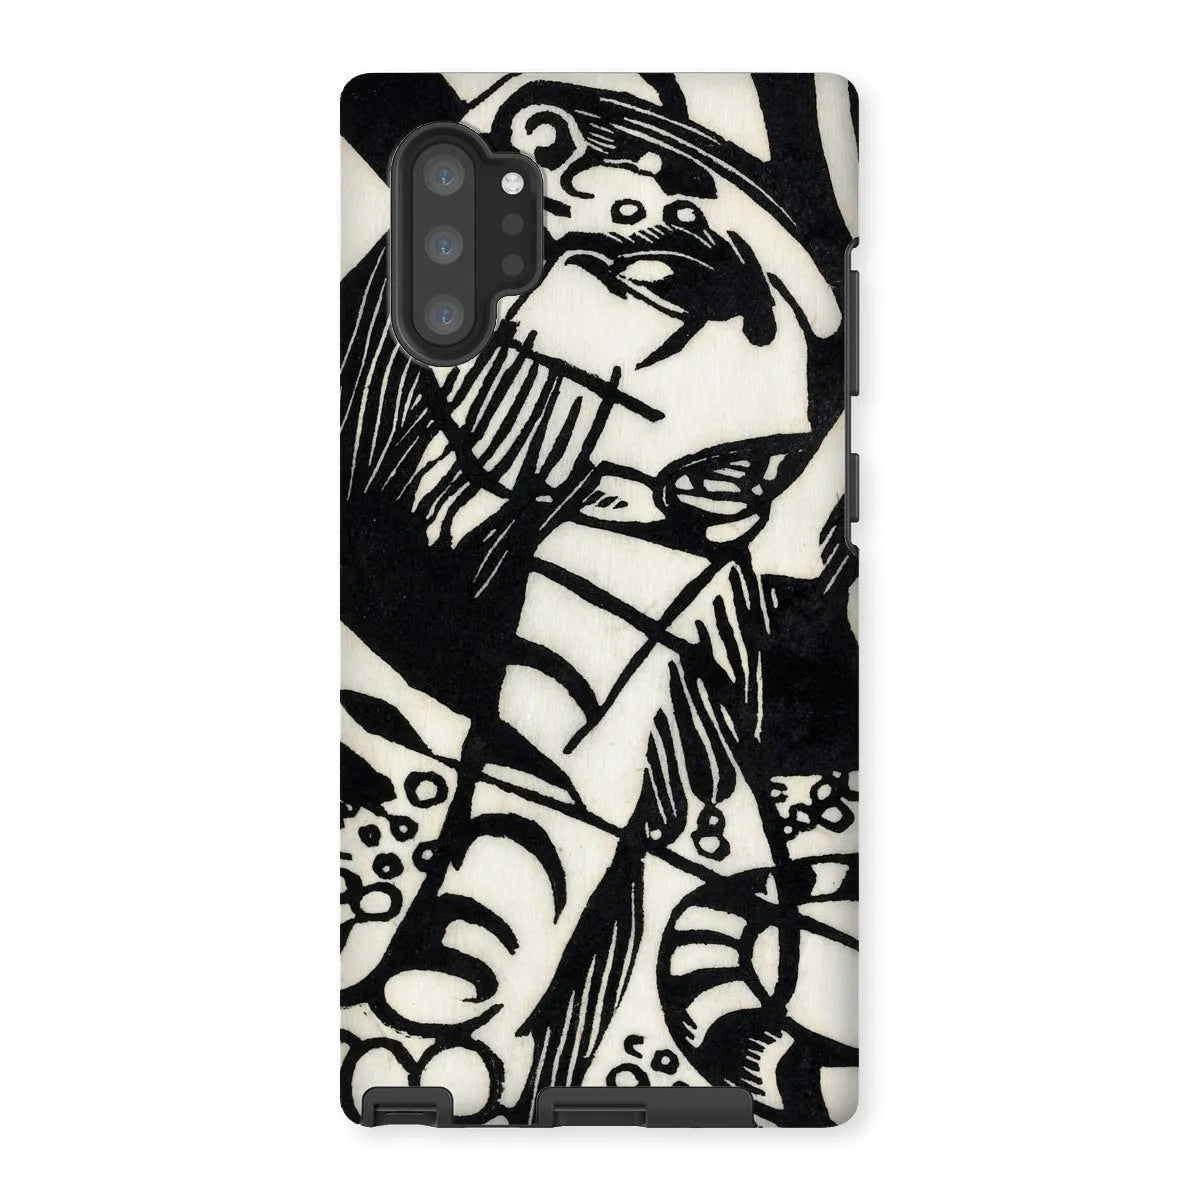 Tiger - Animal Aesthetic Phone Case - Franz Marc - Samsung Galaxy Note 10p / Matte - Mobile Phone Cases - Aesthetic Art